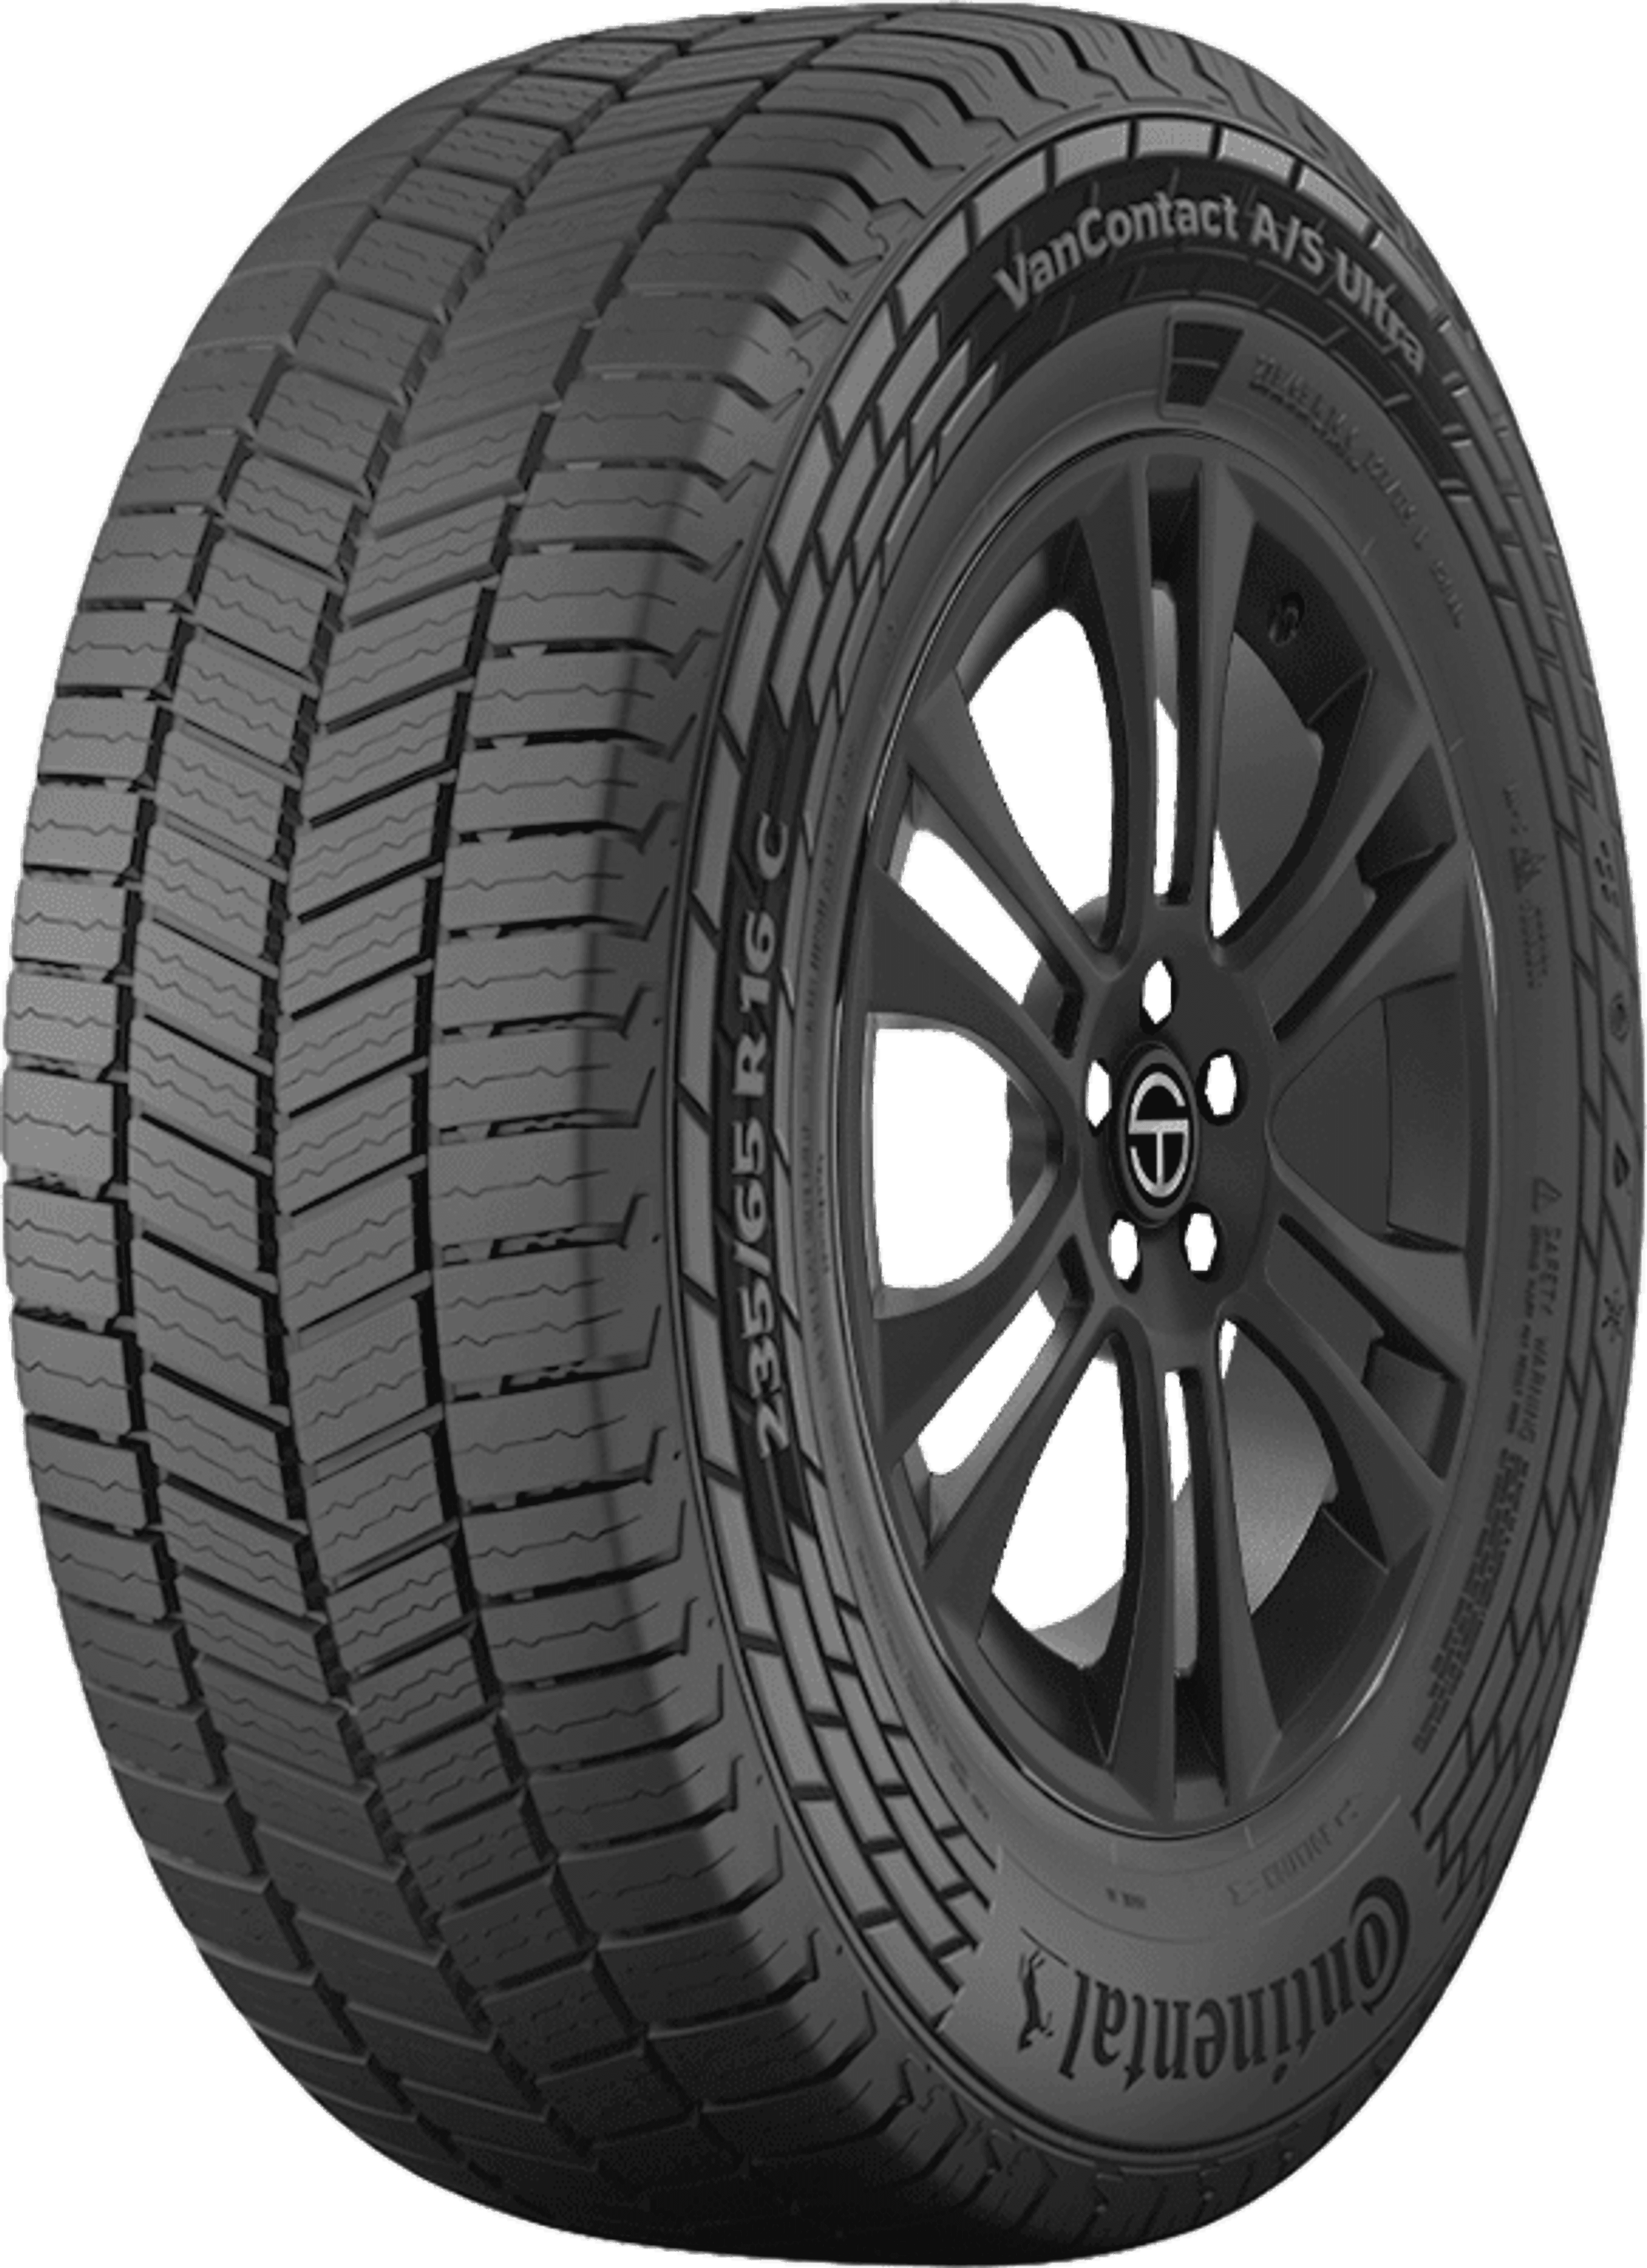 SimpleTire Vancontact Tires Buy Ultra Online | Continental A/S